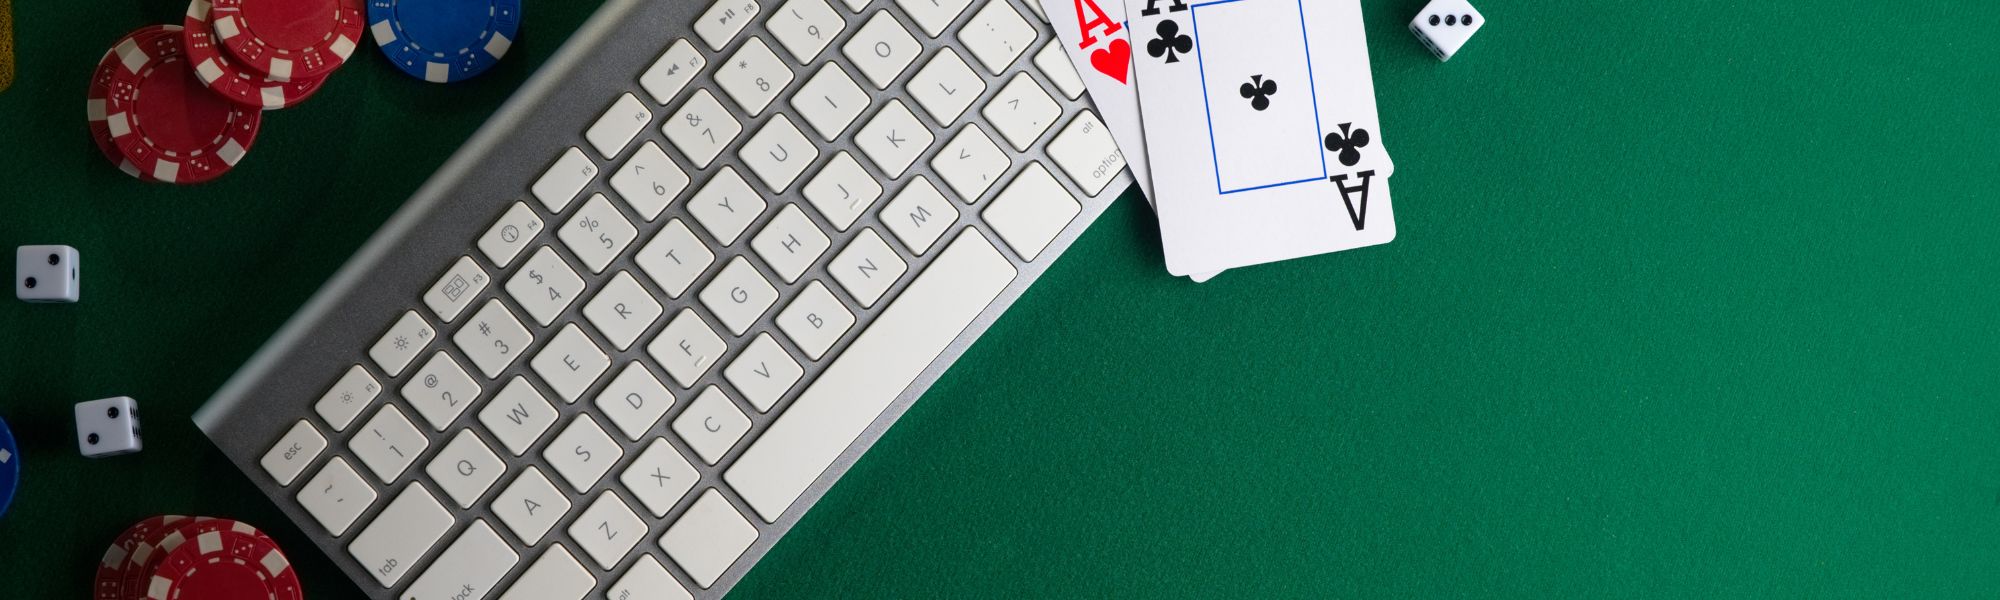 The UK gambling market and its growth potential to 2030